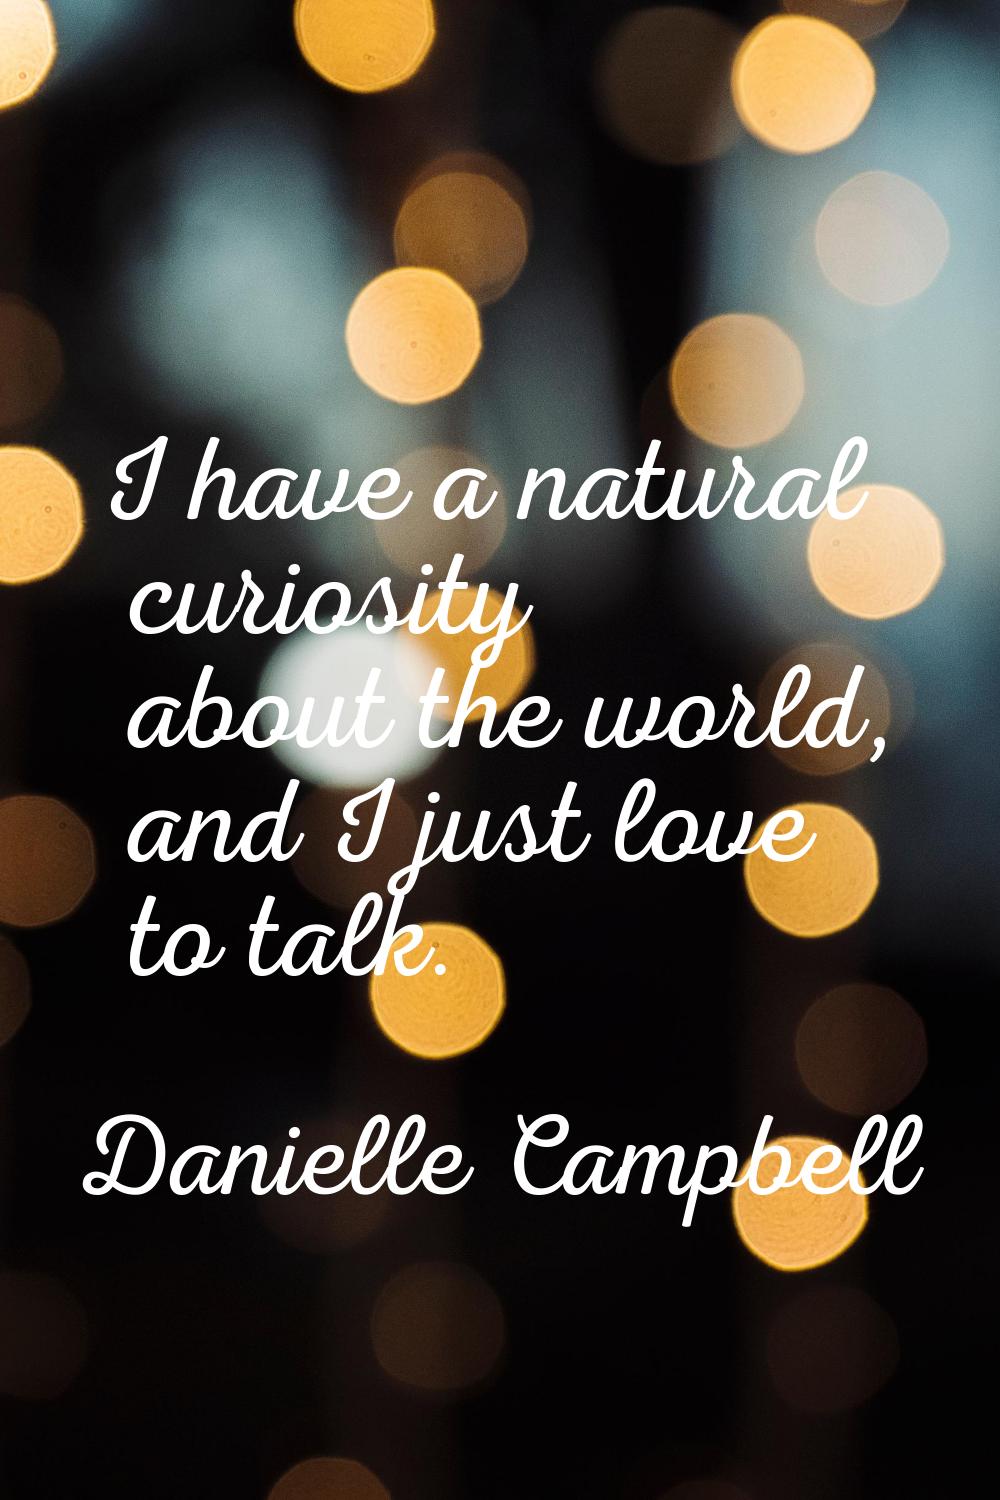 I have a natural curiosity about the world, and I just love to talk.